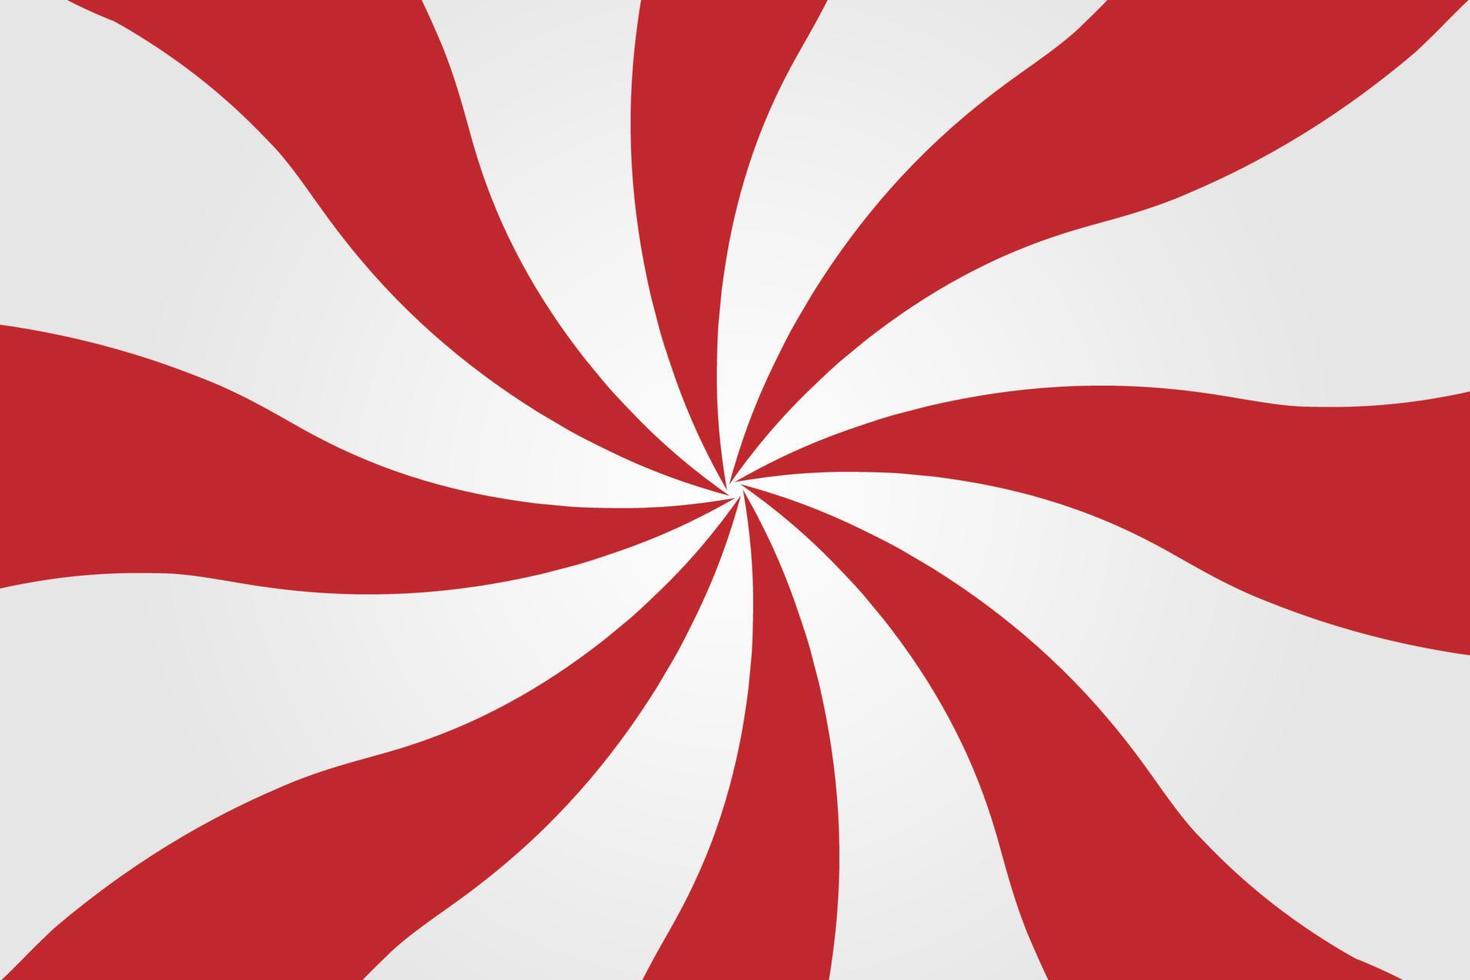 red and white stripes radial abstract background design sunburst vector